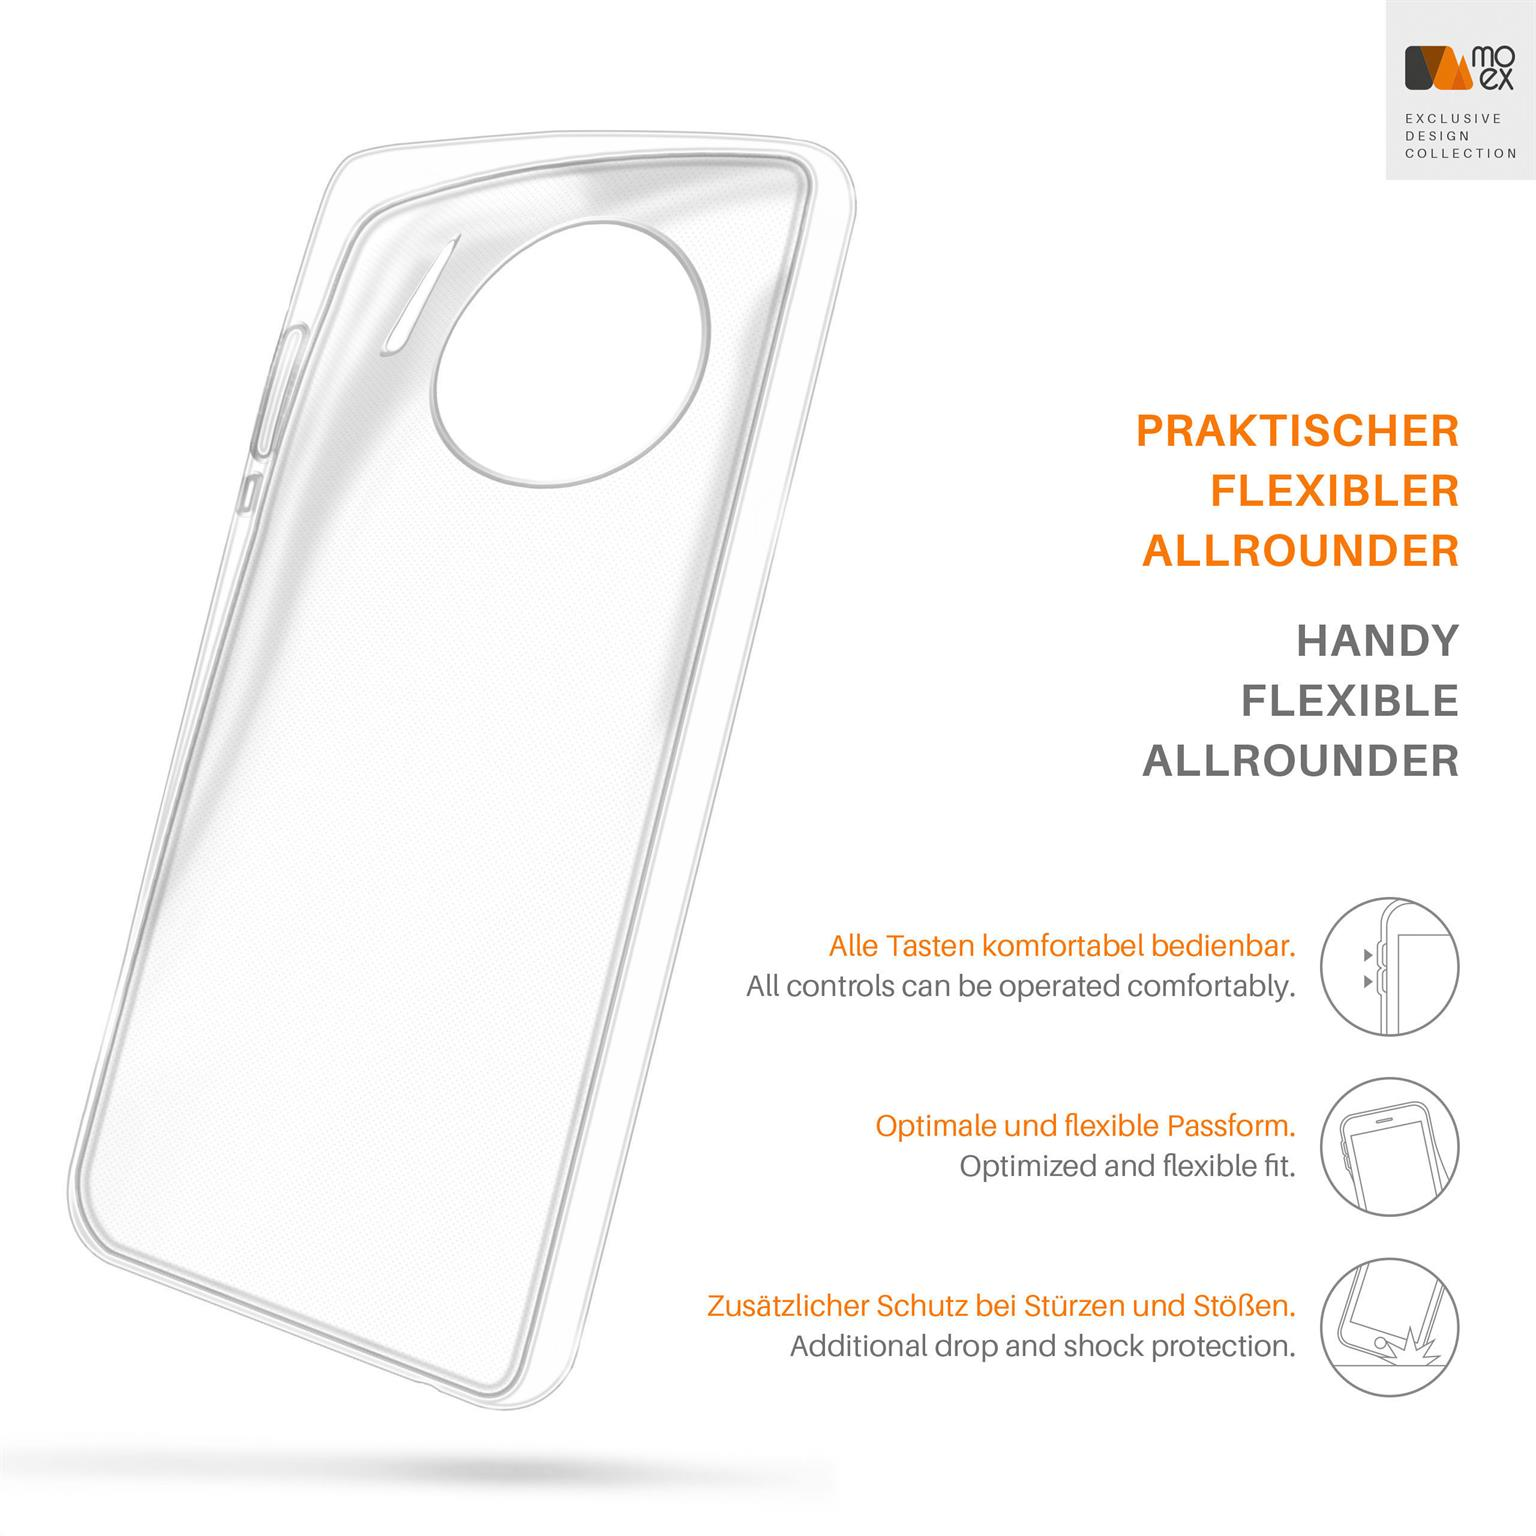 Case, 30 Pro, MOEX Huawei, Crystal-Clear Backcover, Aero Mate